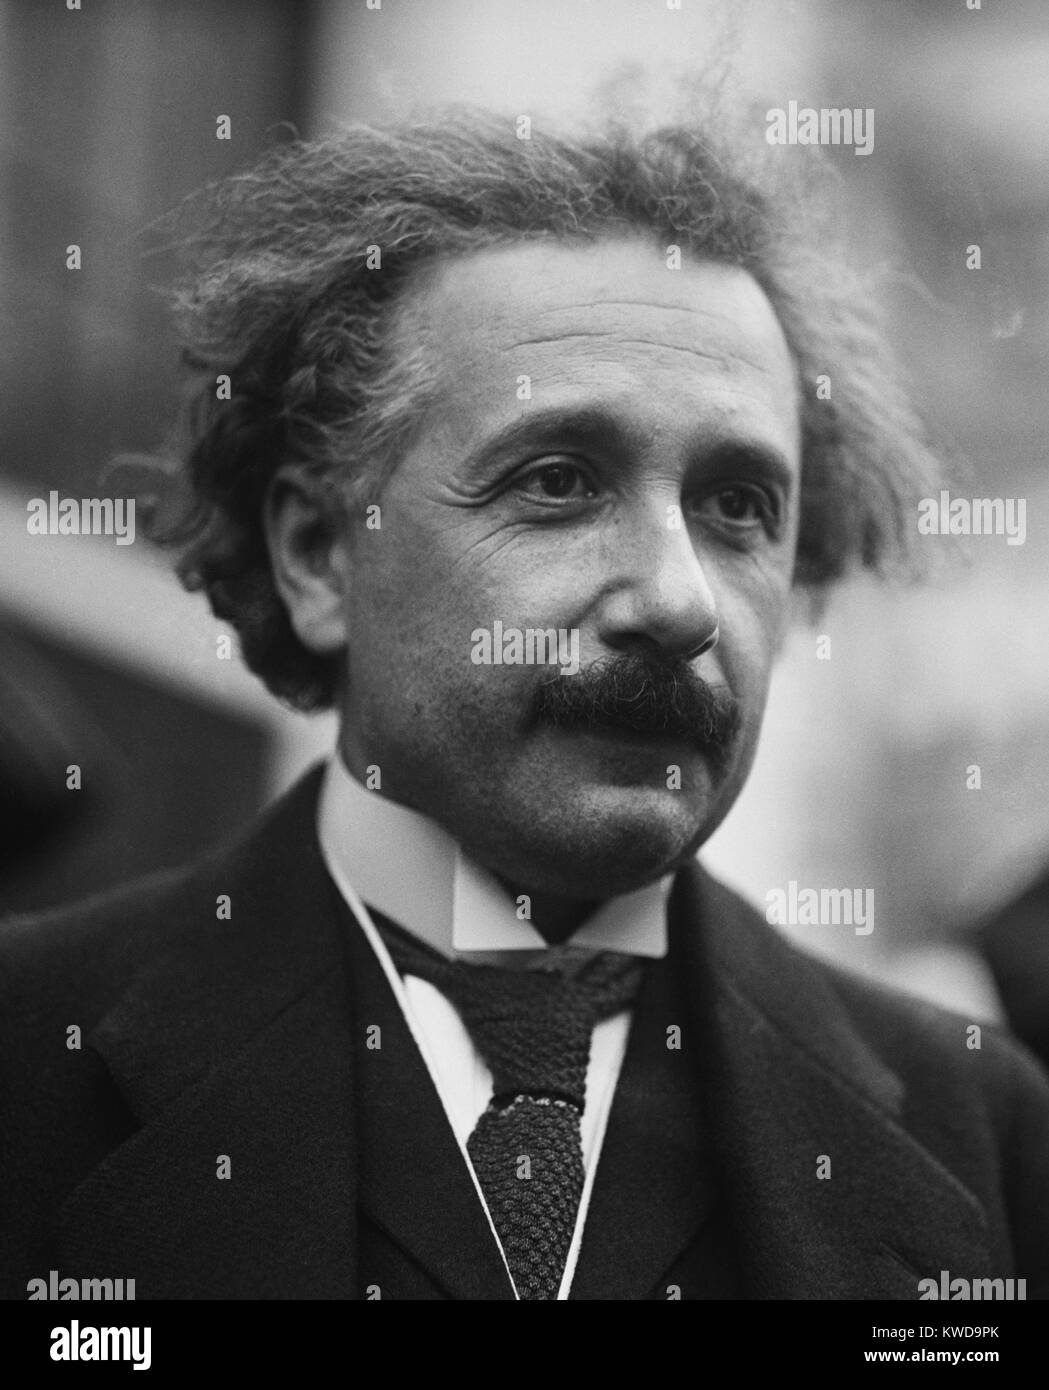 Albert Einstein, German theoretical physicist in Washington, D.C., April 25, 1921. During his first trip to the U.S. he met with President Harding and addressed the National Academy of Science. Later in the year he received the 1921 Nobel Prize in Physics (BSLOC 2016 10 5) Stock Photo